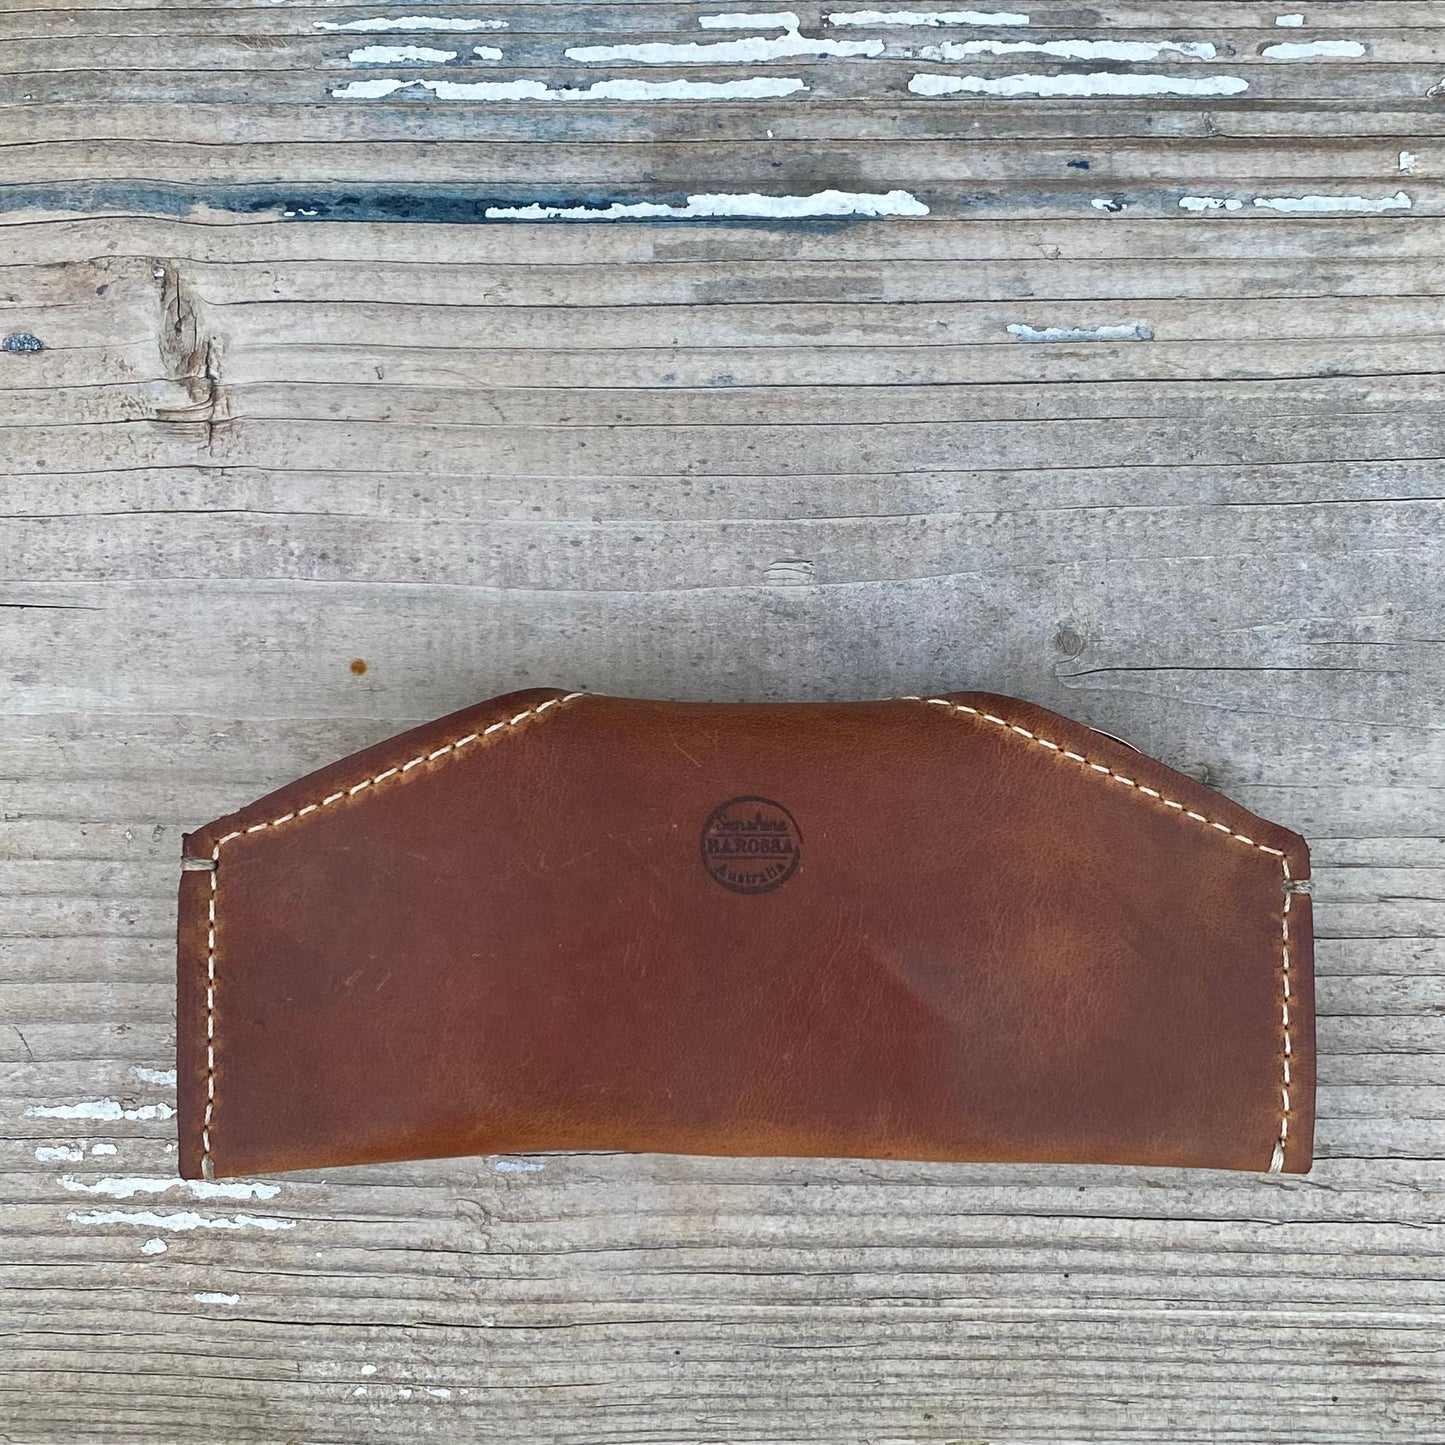 A Thin Leather Snap Lock Glasses Case